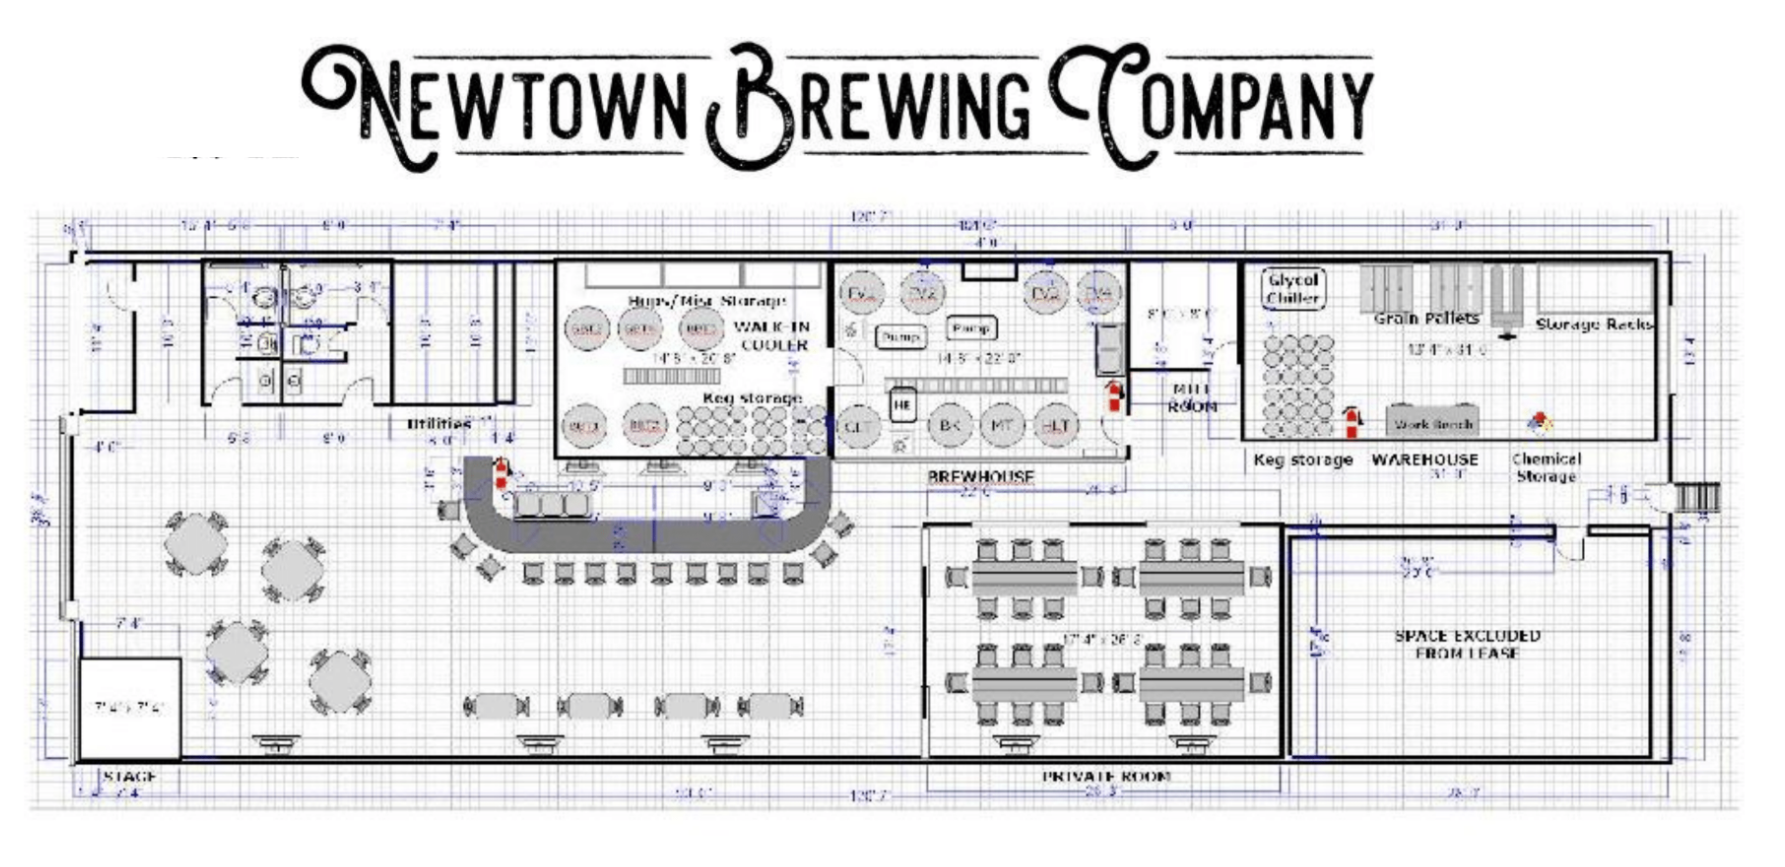 Newtown Brewing Company rendering